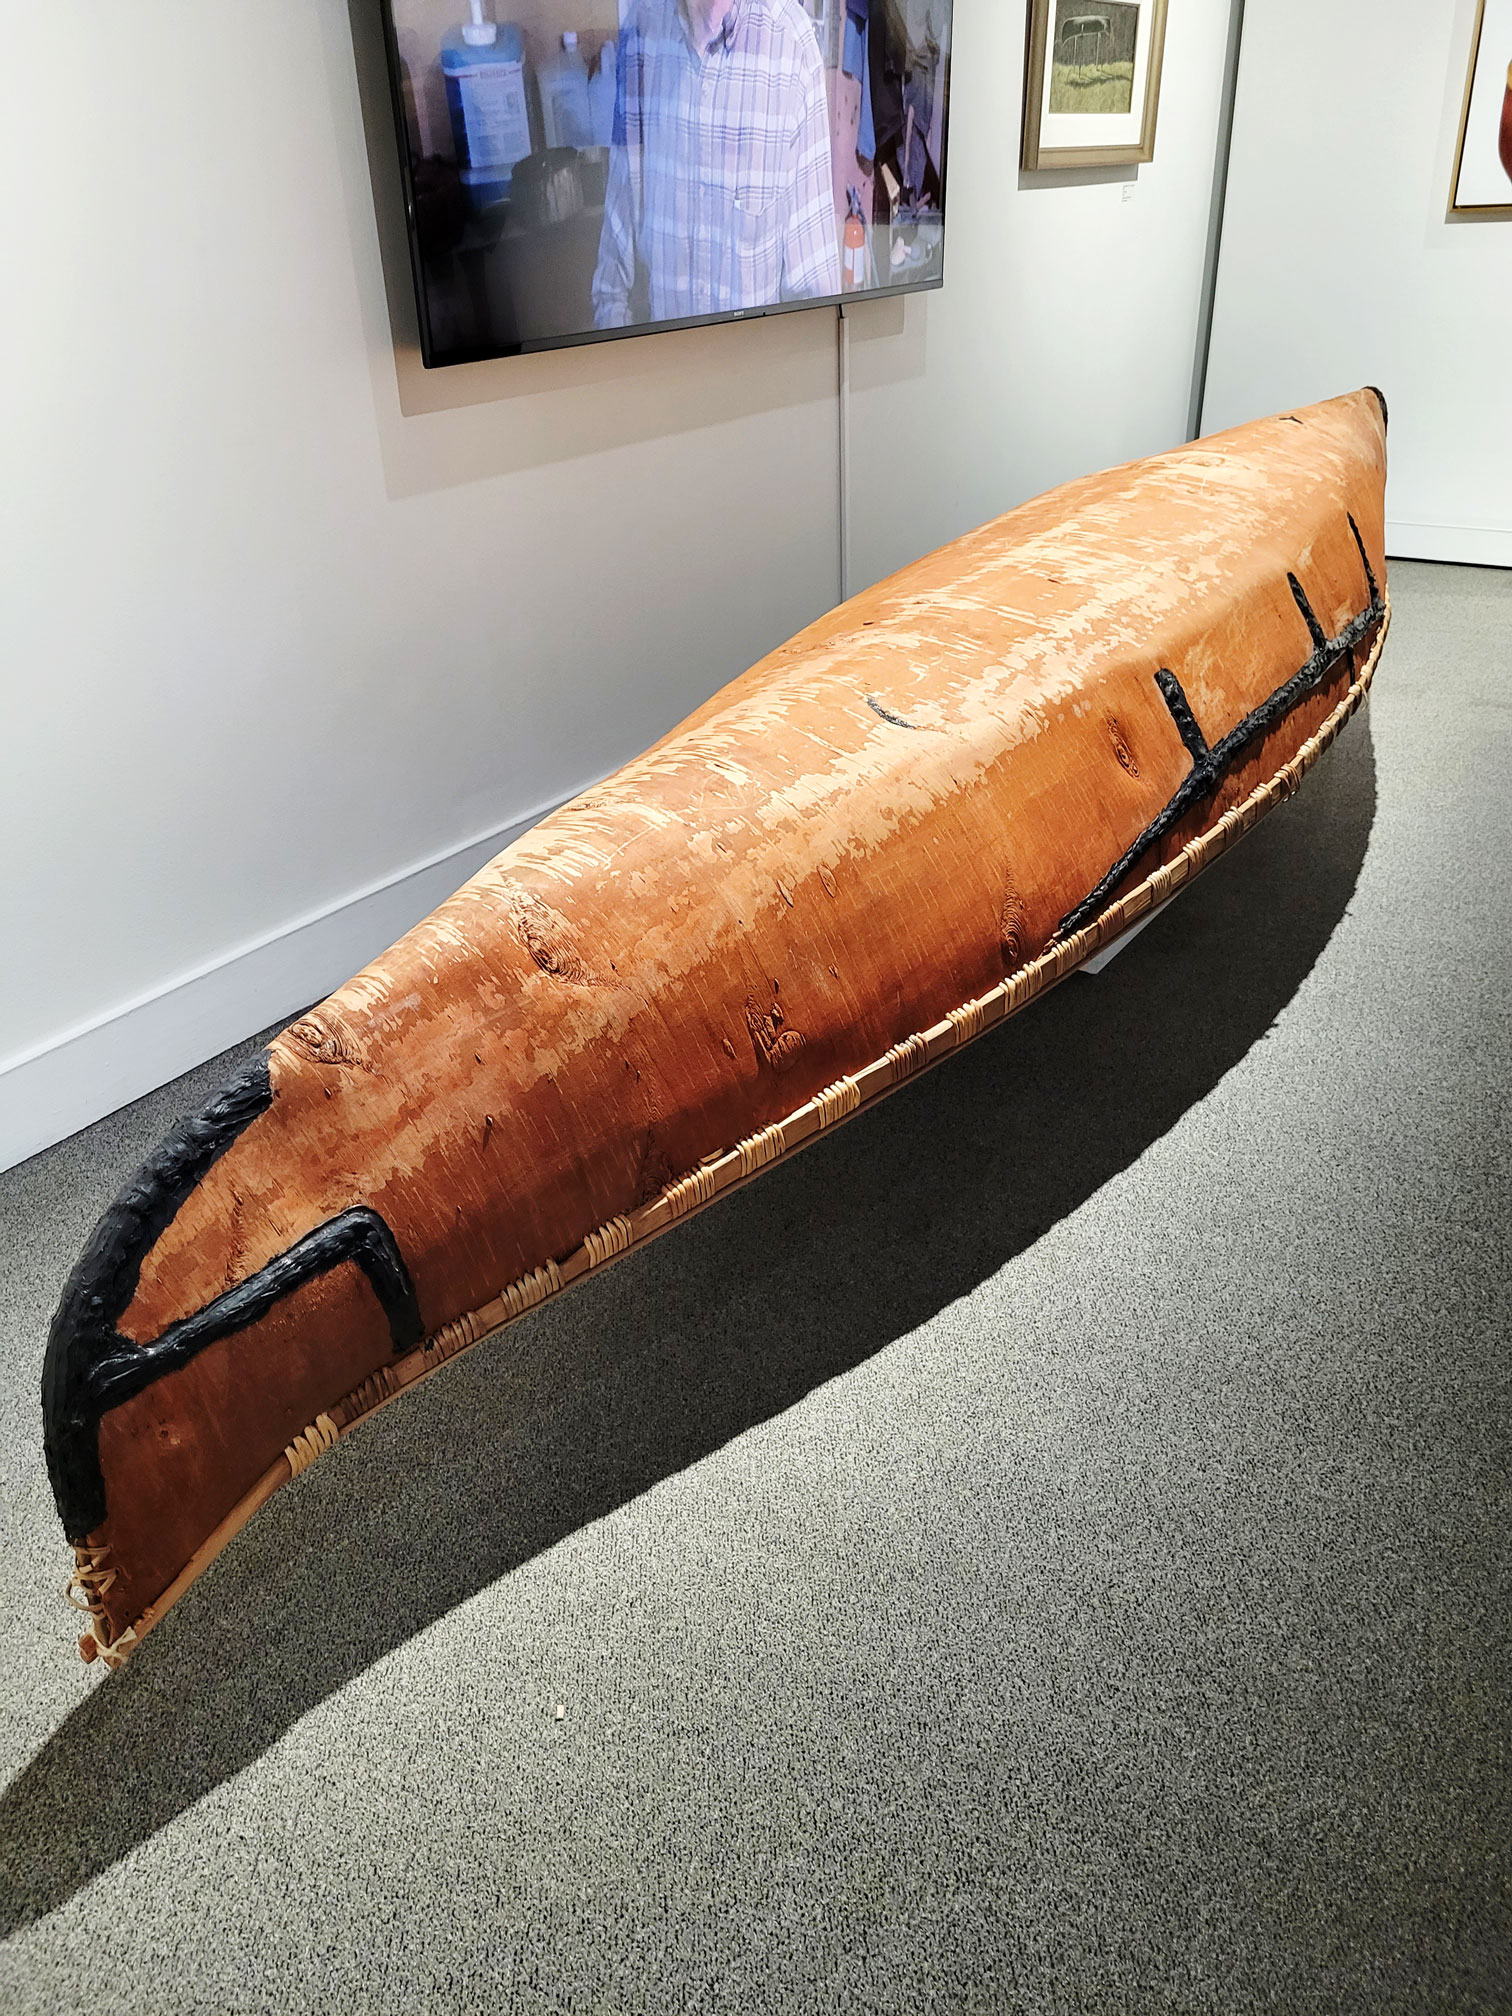 Birch Canoe by Don Gardner. 14' canoe made from a single piece of birch bark. Part of the McCreath Collection on display at the Whyte Museum of the Canadian Rockies.